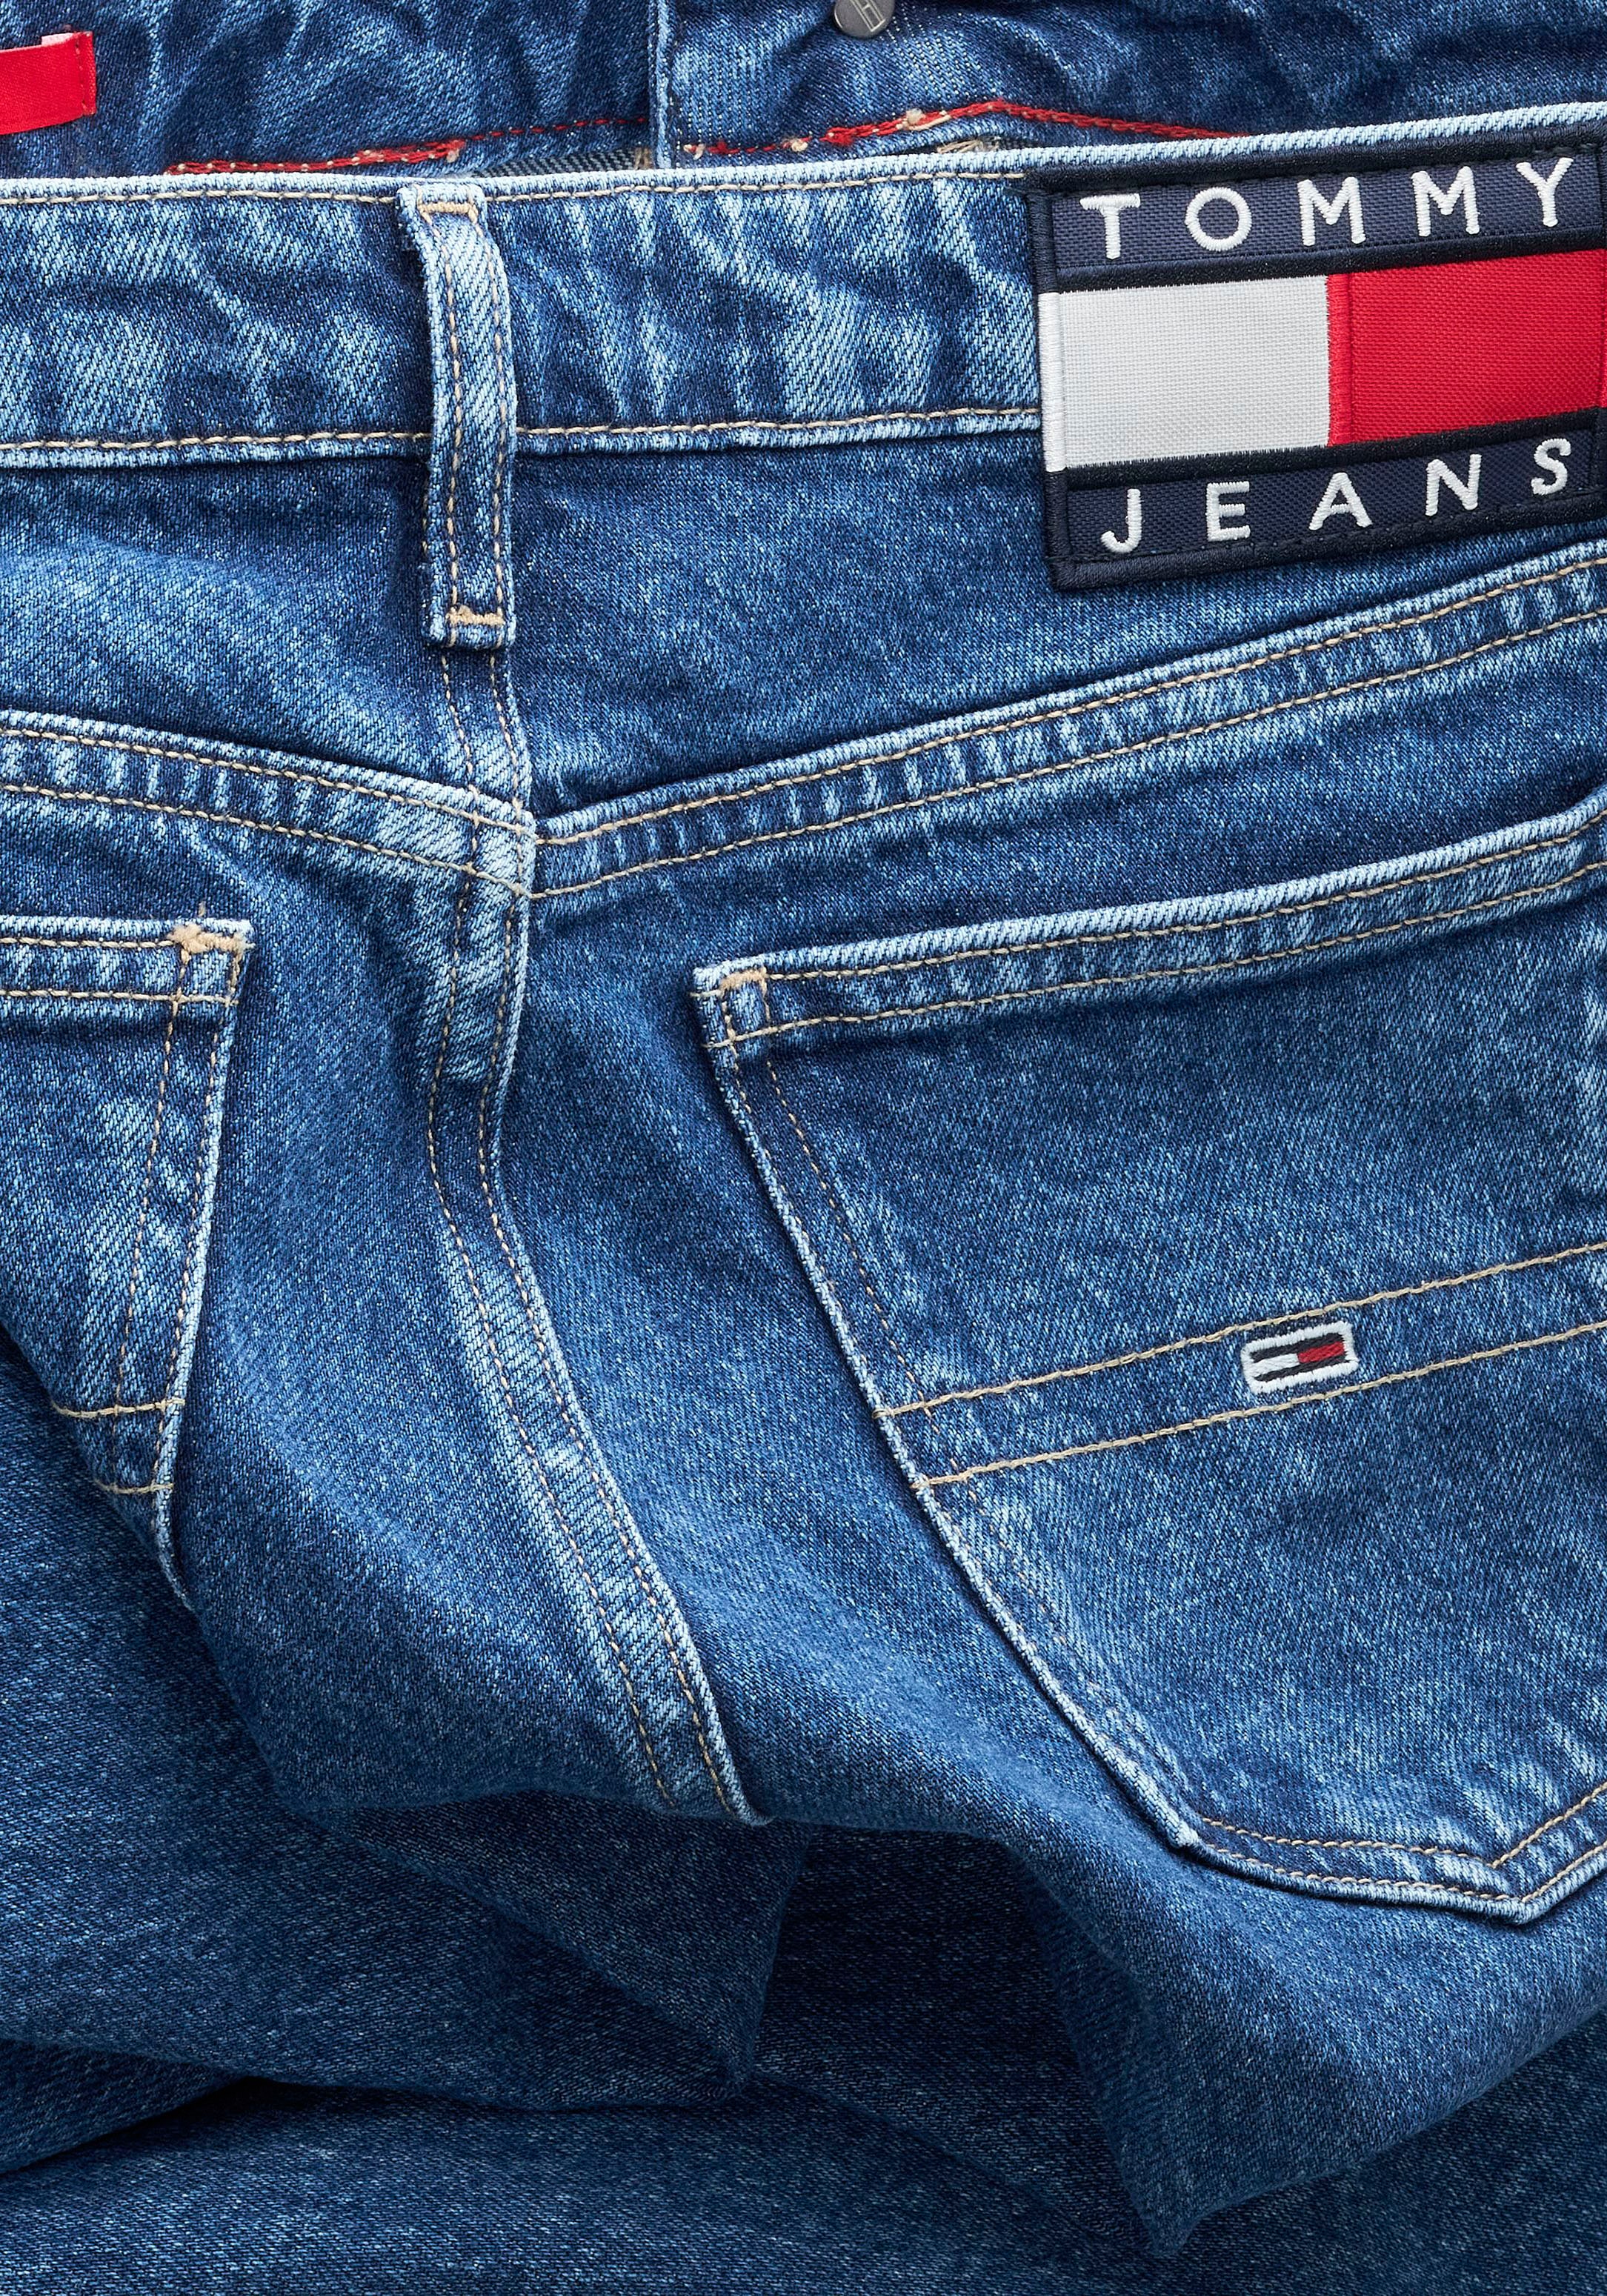 Tommy Jeans ♕ mit Schlagjeans, Jeans Logobadge bei Tommy